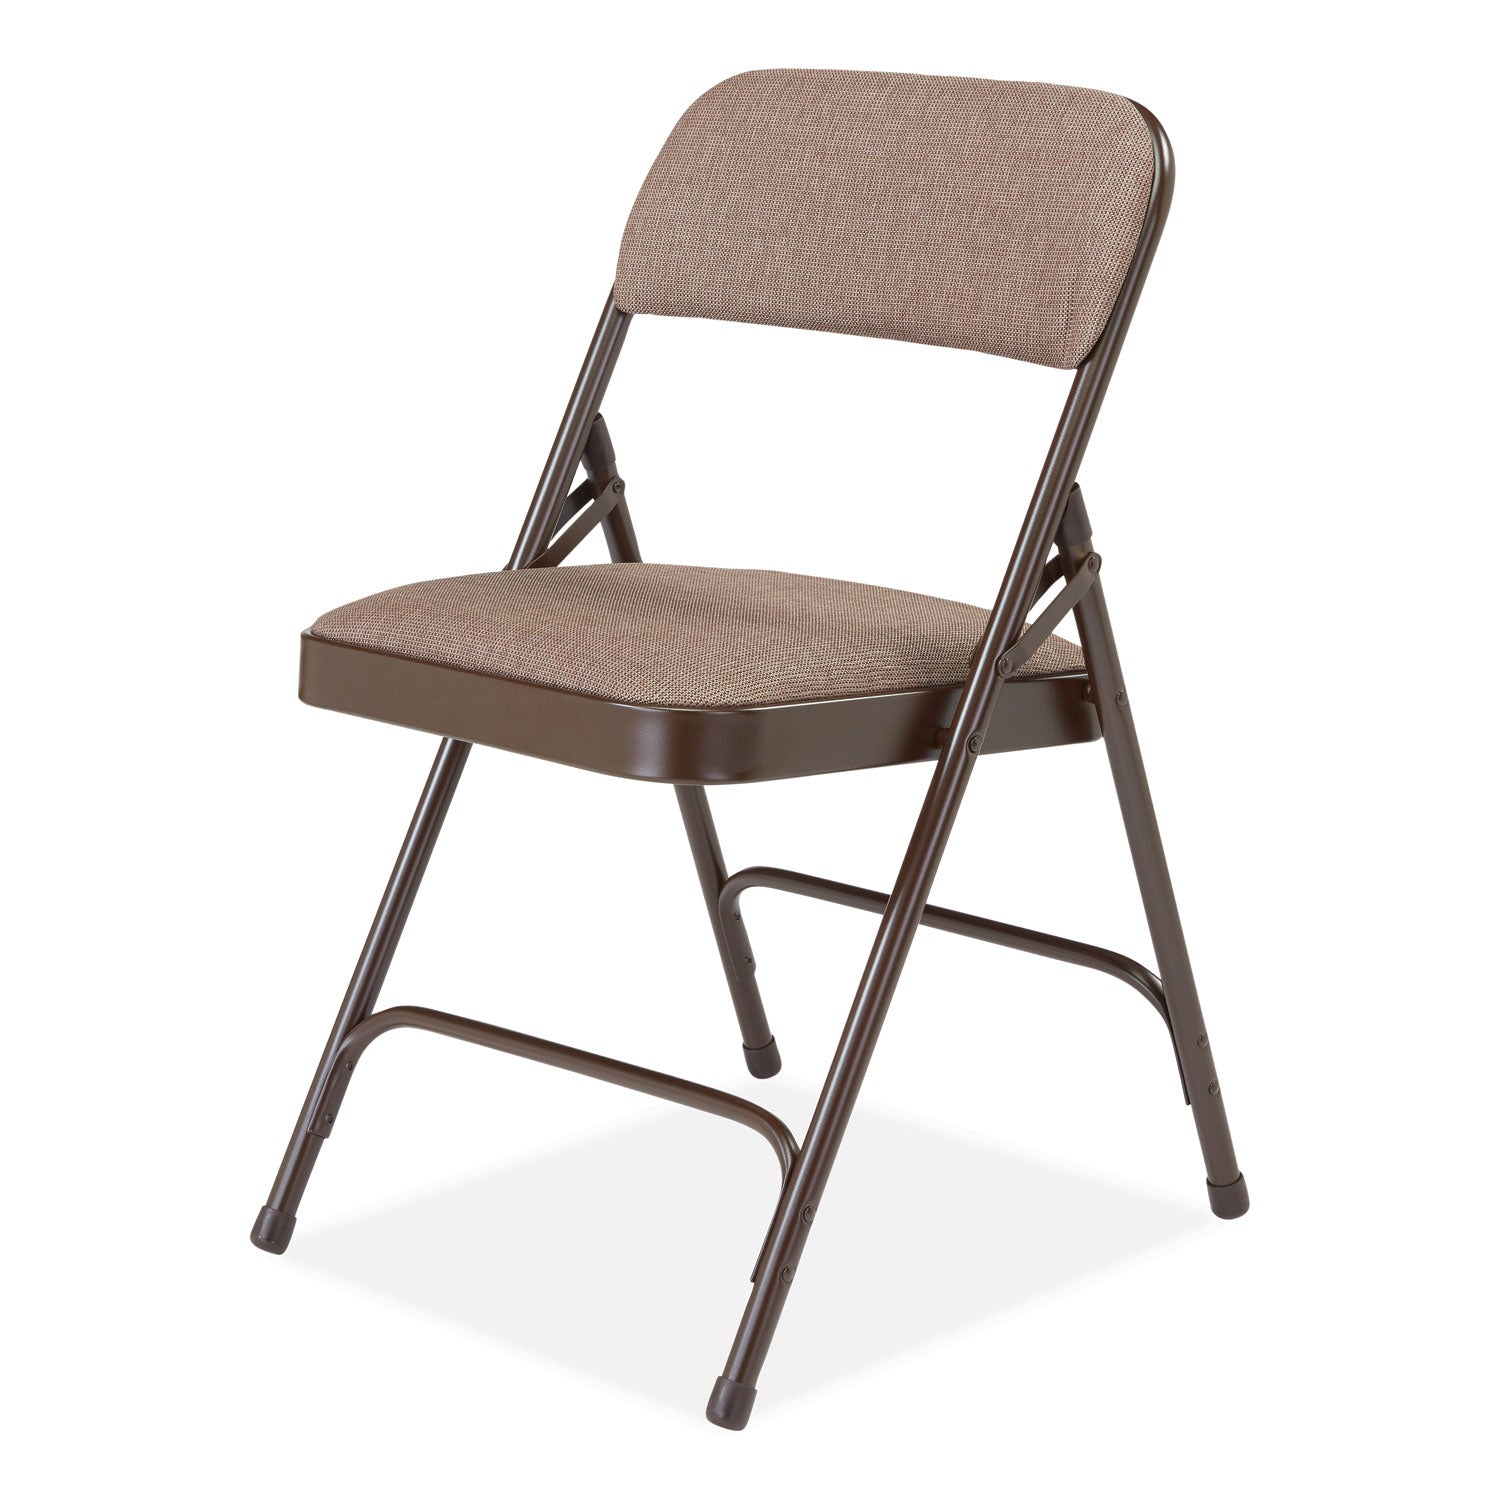 2200-series-fabric-dual-hinge-premium-folding-chair-supports-500-lb-walnut-seat-back-brown-base4-ctships-in-1-3-bus-days_nps2207 - 3